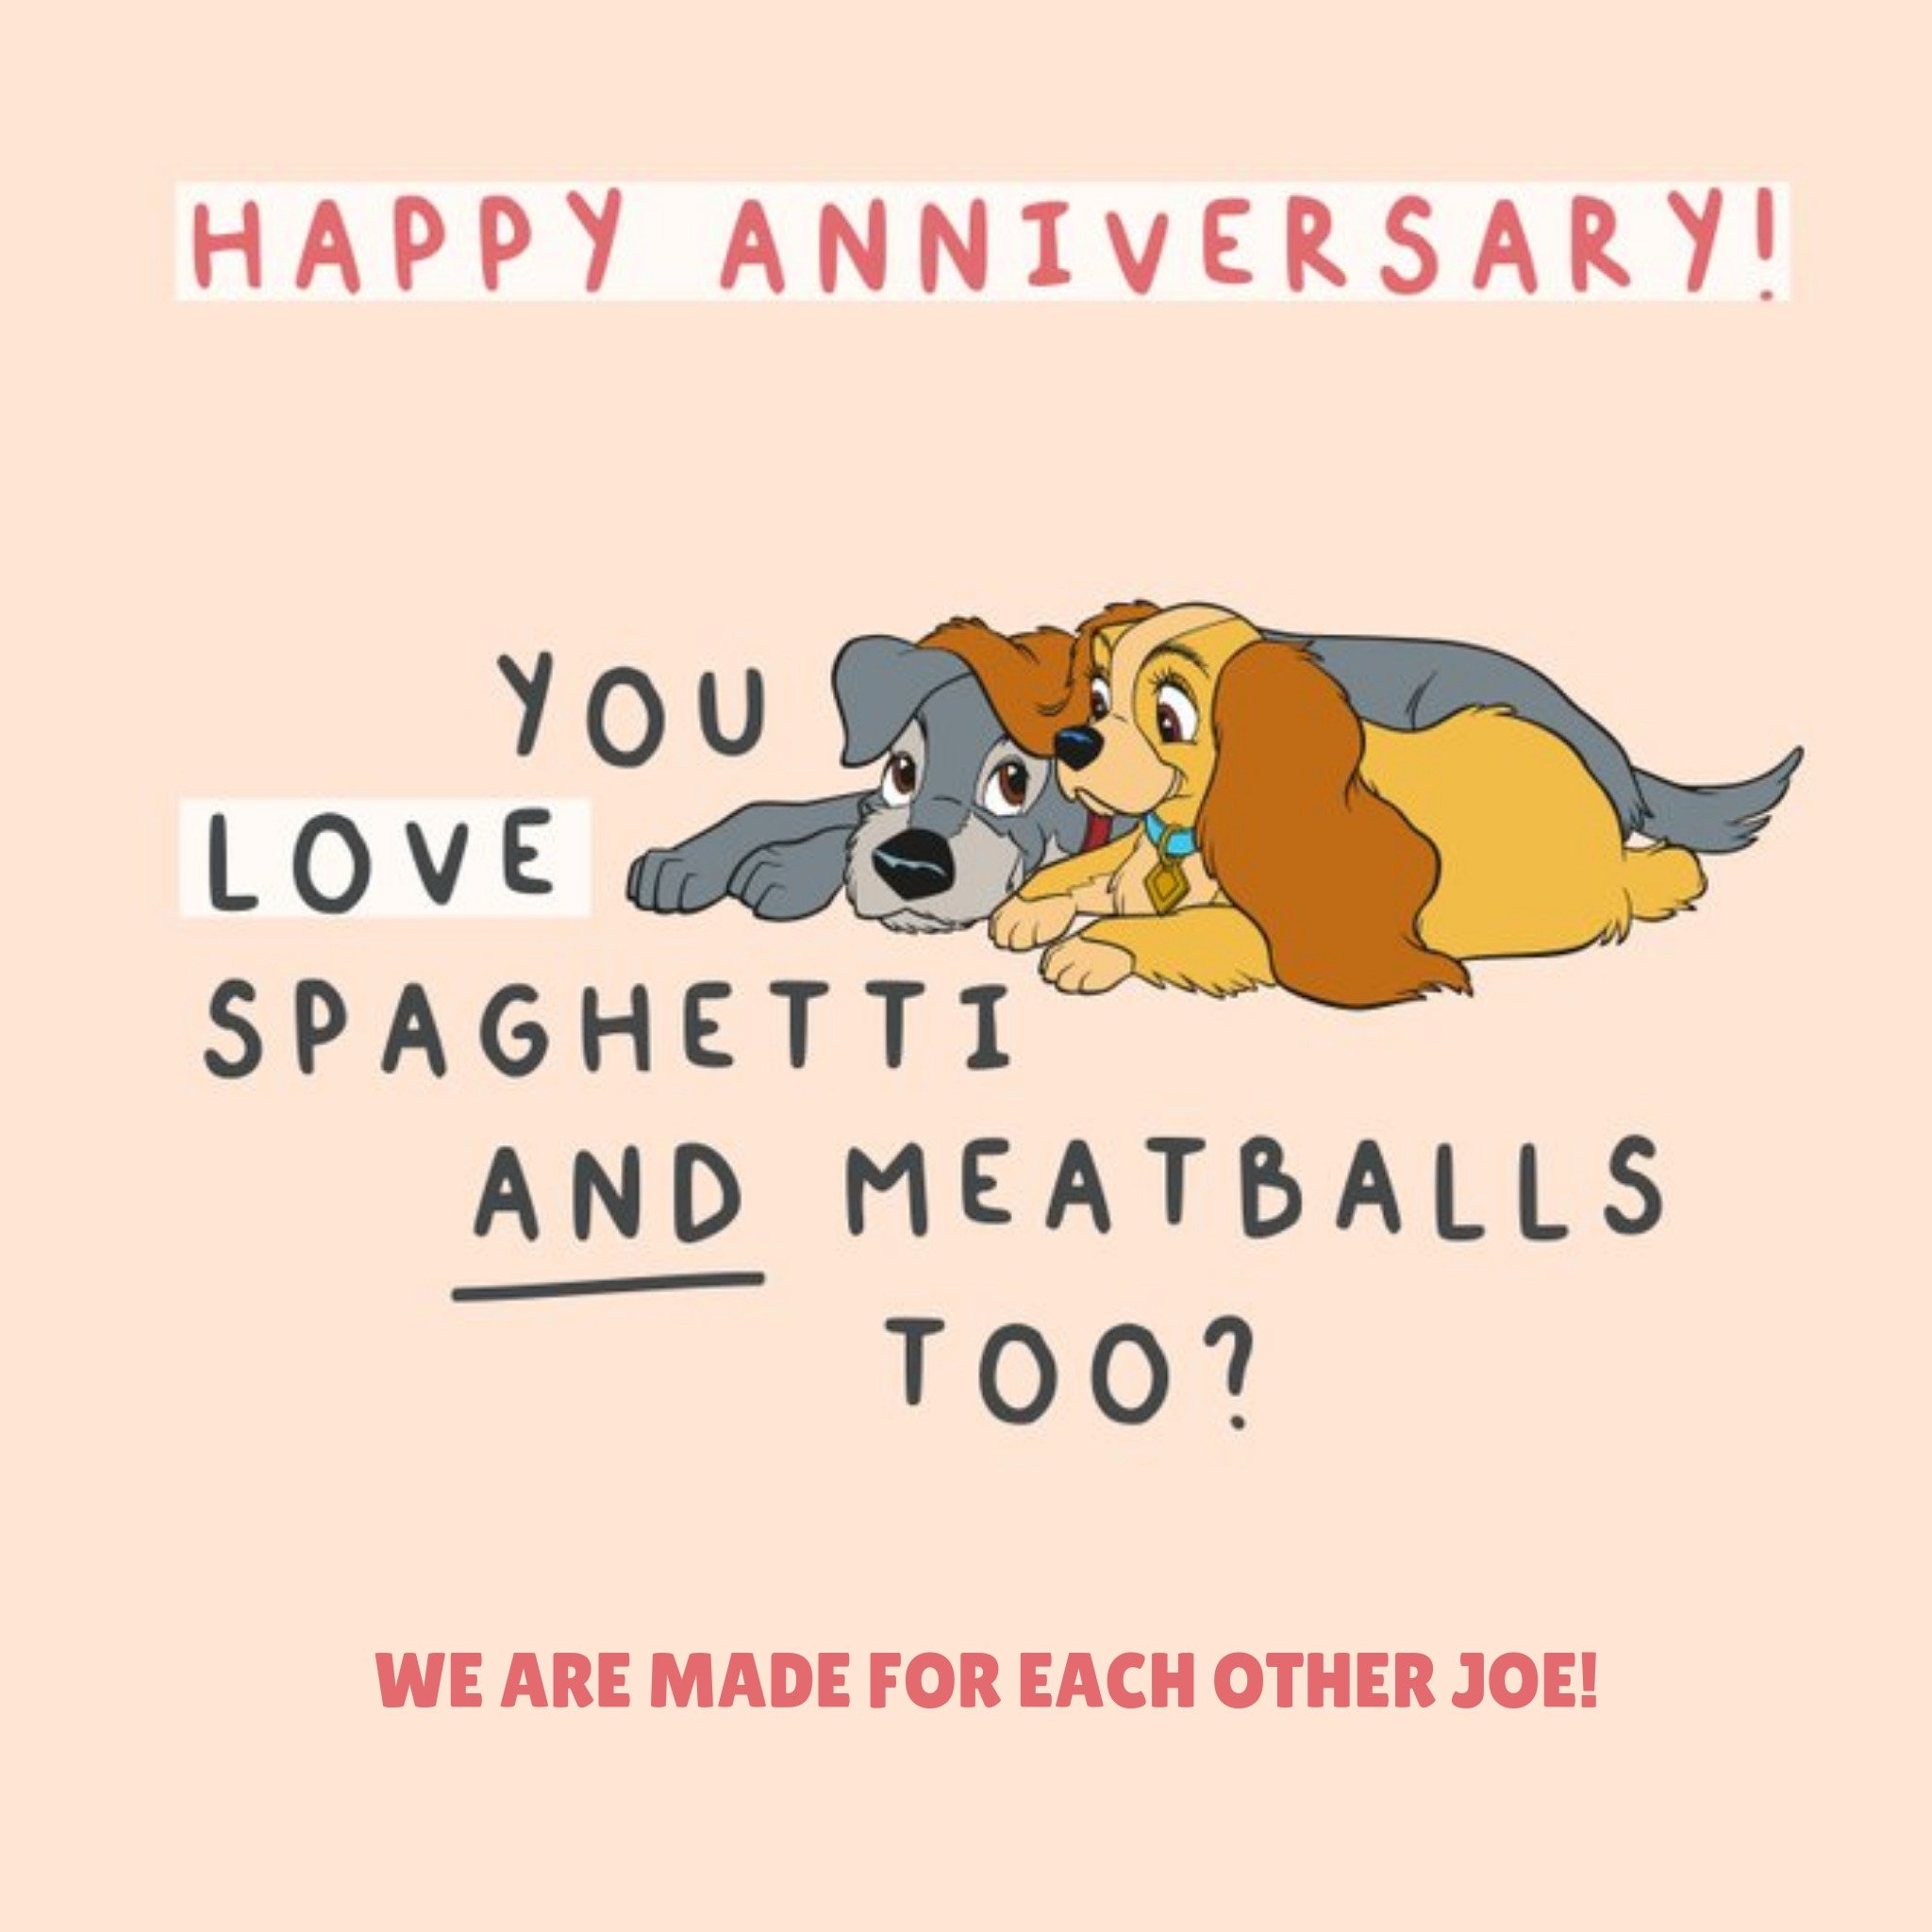 Disney Lady And The Tramp Spaghetti And Meatballs Anniversary Card, Square